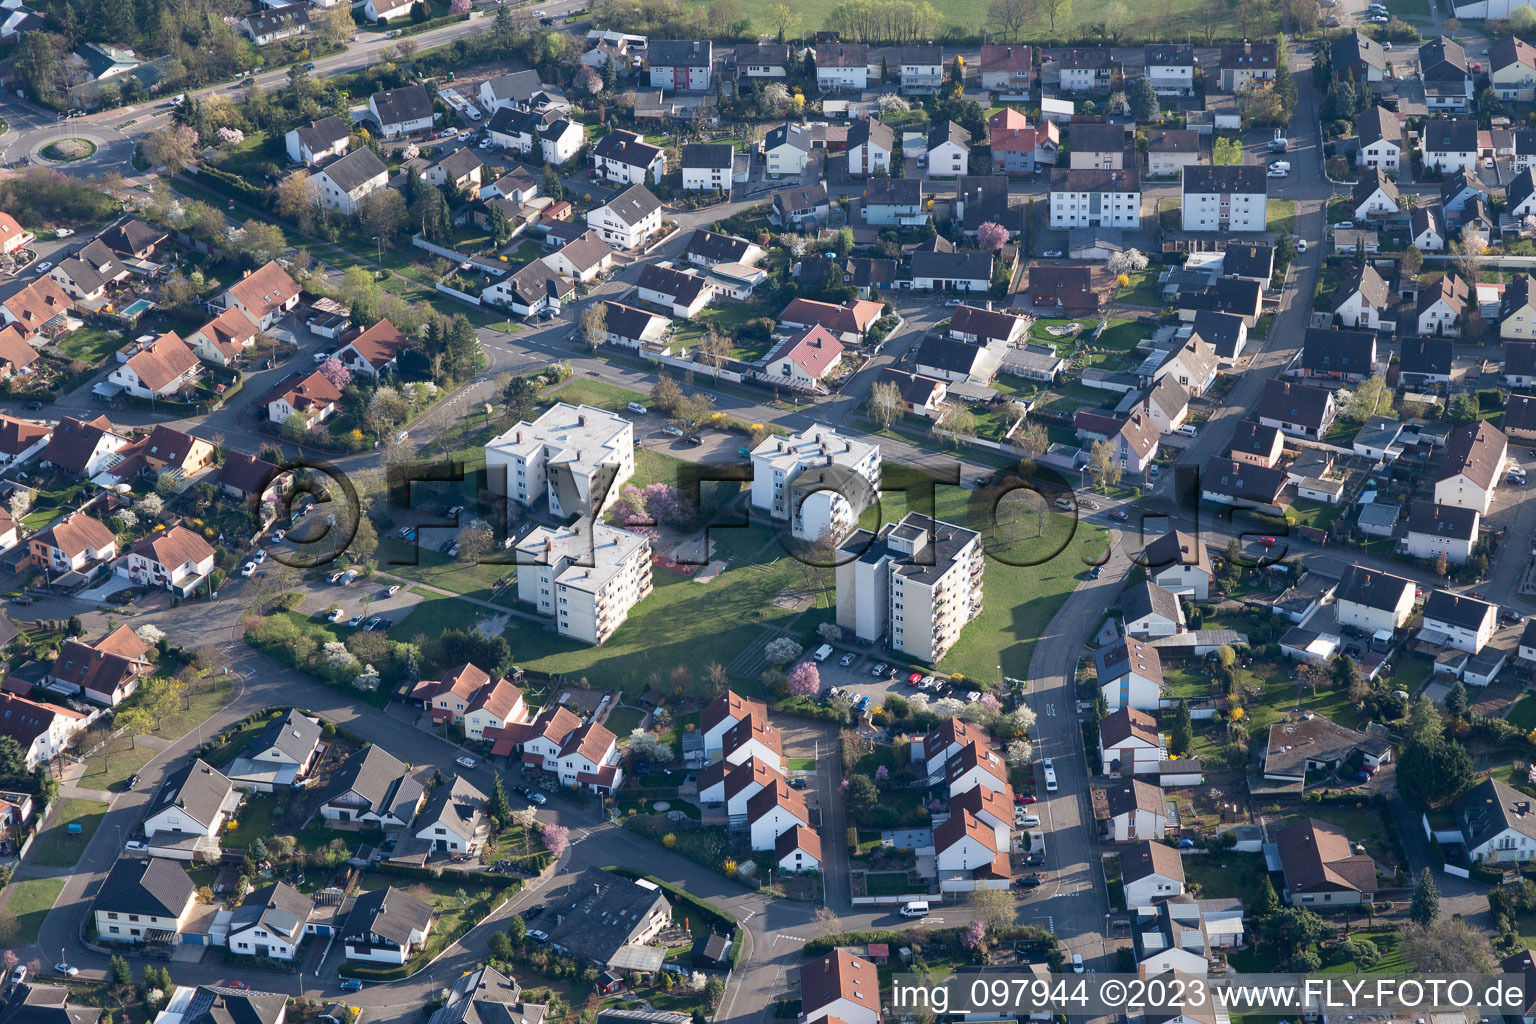 Aerial photograpy of Bellheim in the state Rhineland-Palatinate, Germany